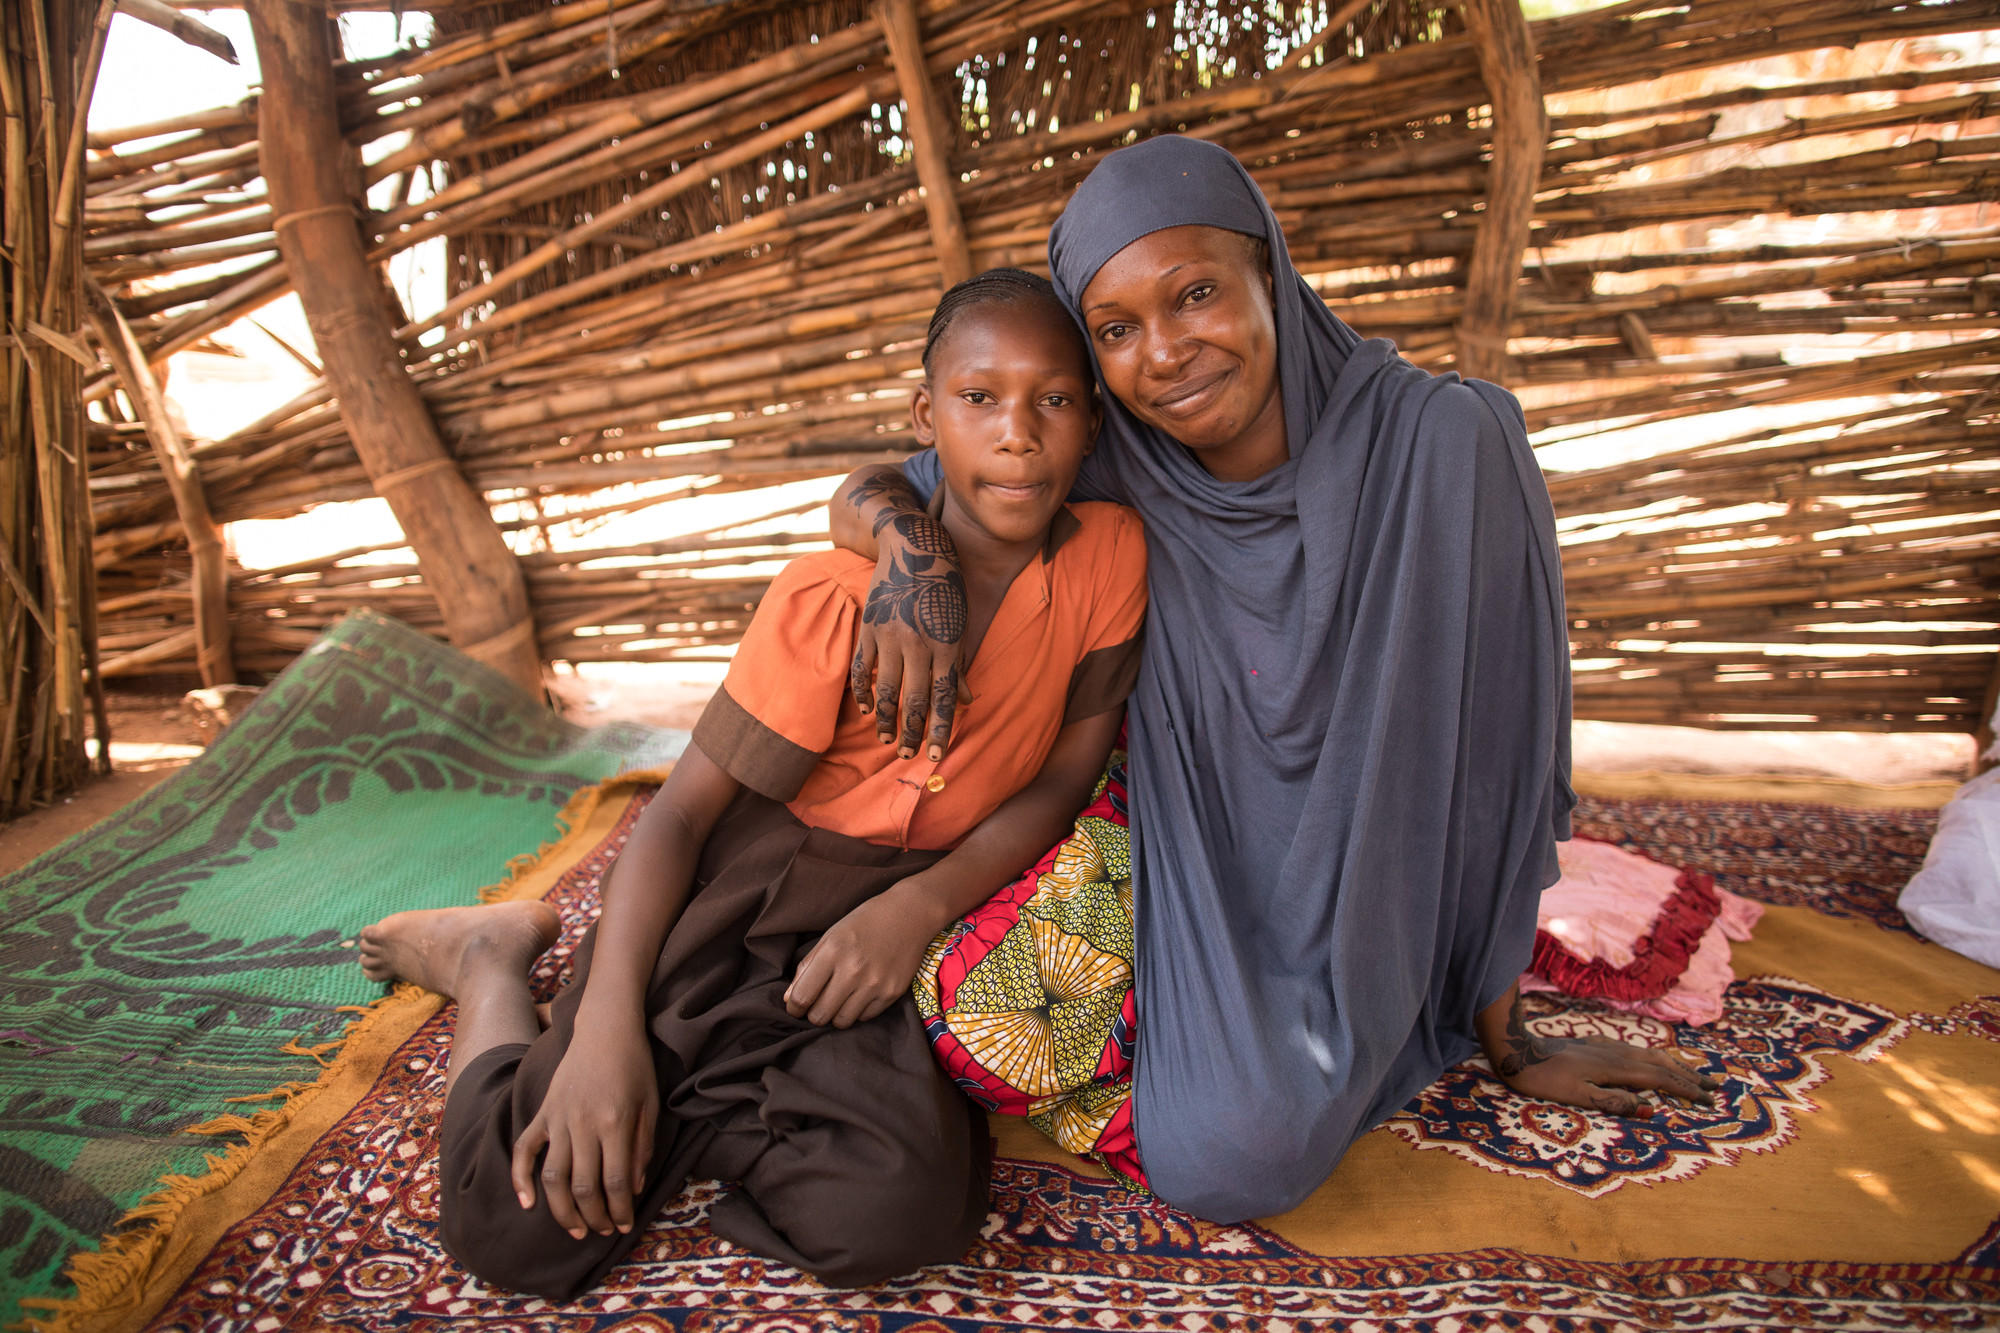 A woman and young girl sitting inside a shelter smiling for a photo